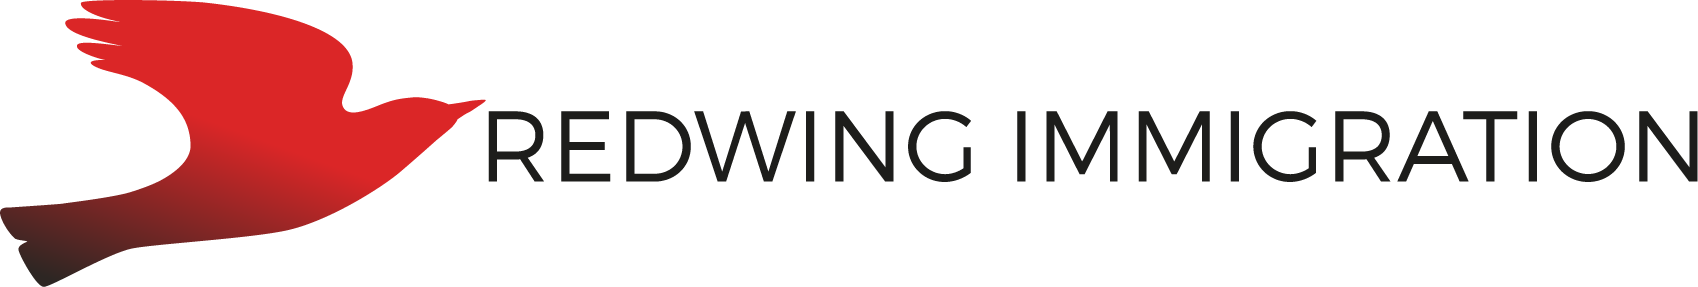 redwing-immigration_logo